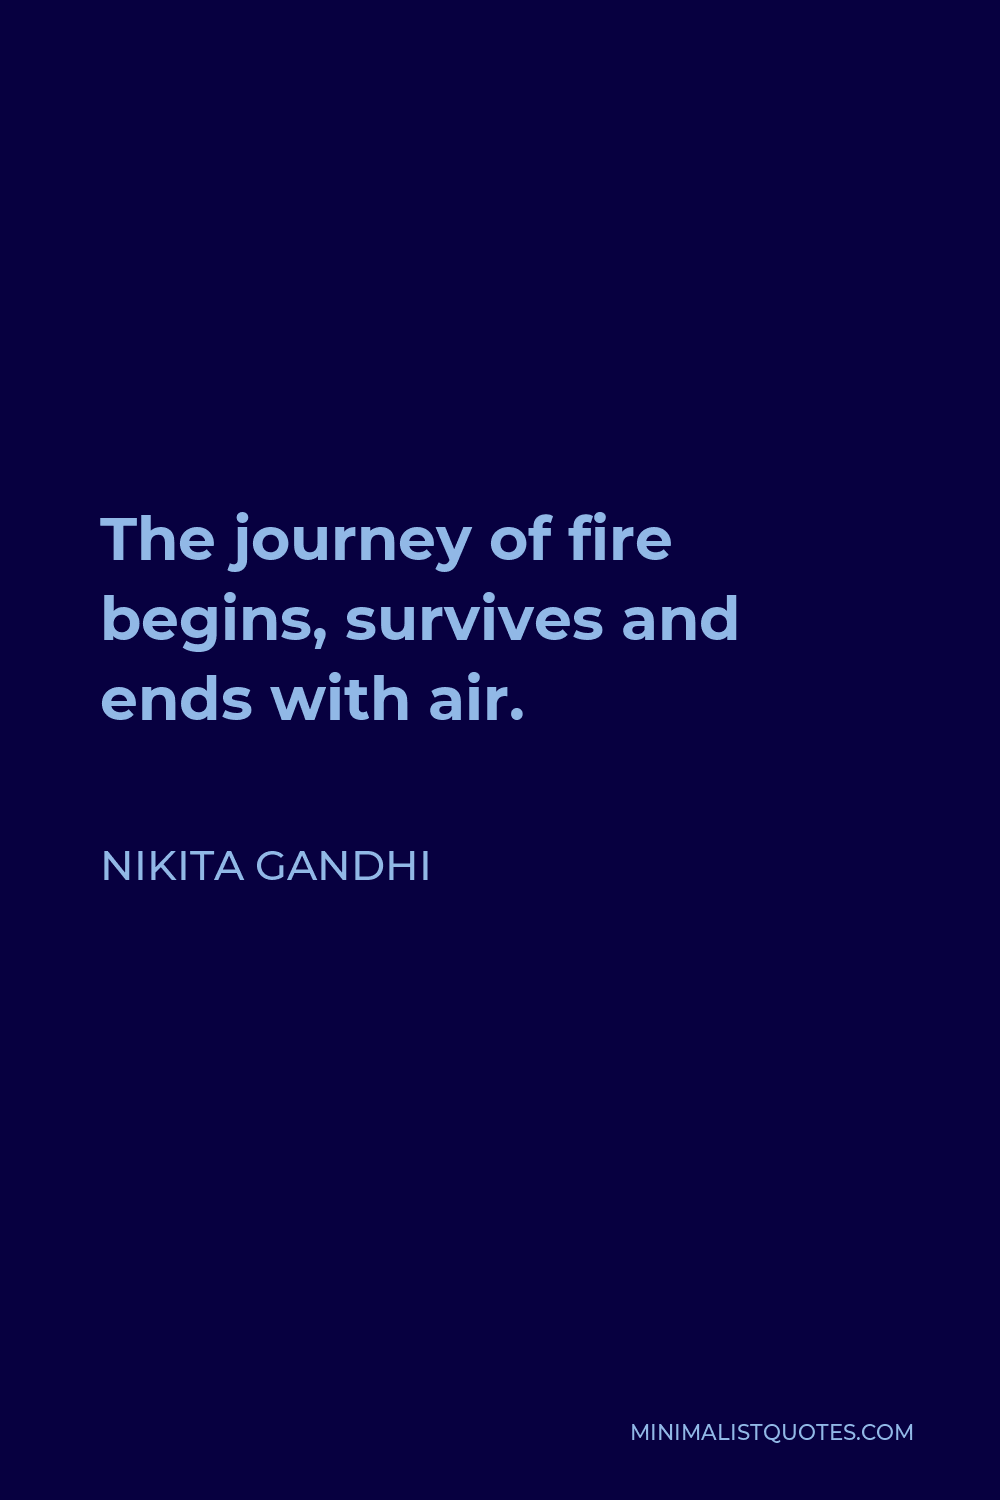 Nikita Gandhi Quote - The journey of fire begins, survives and ends with air.